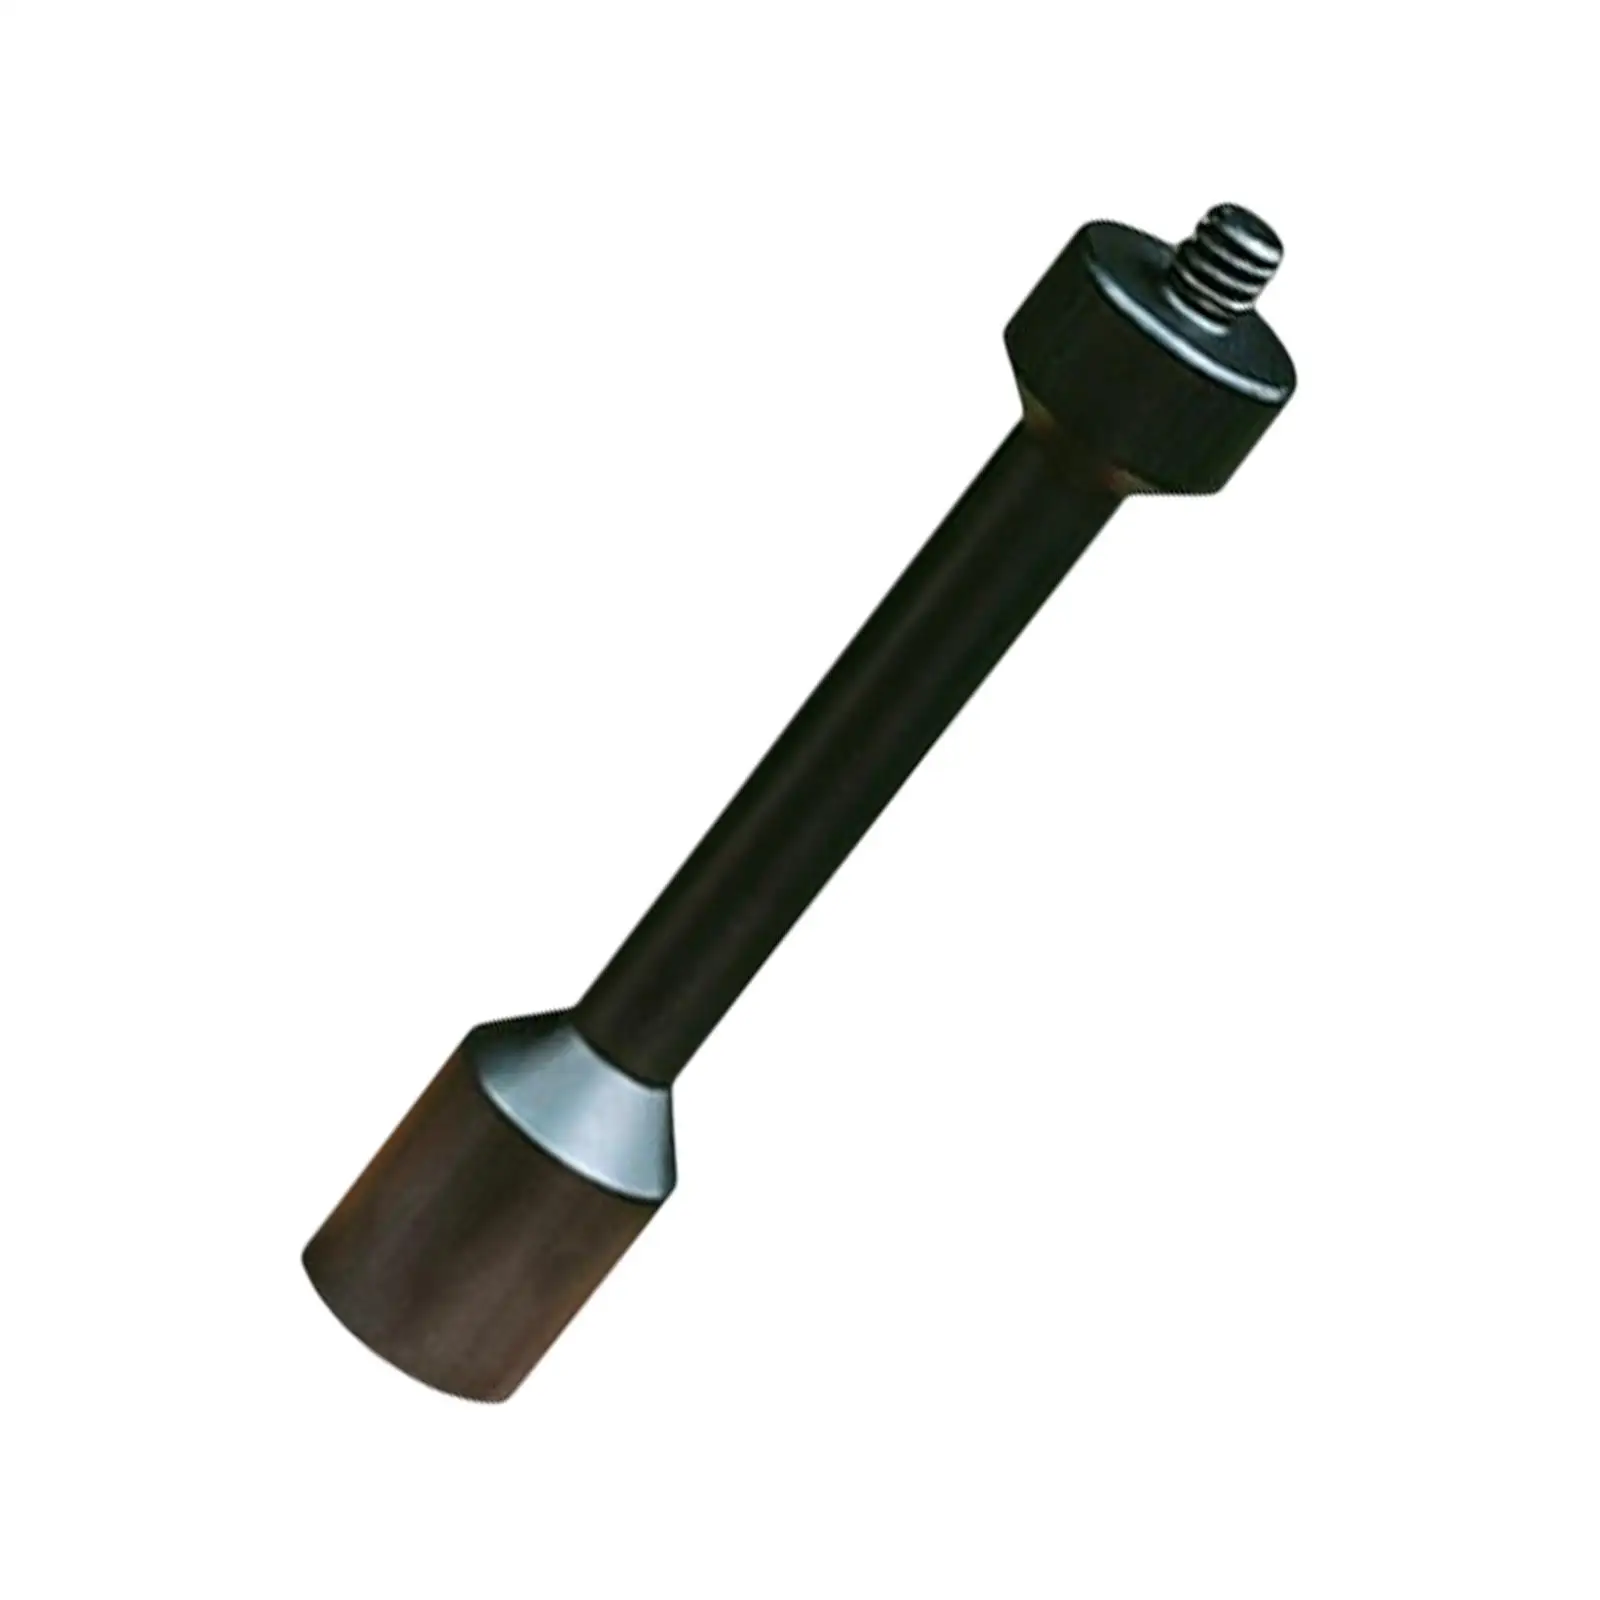 Gas Lantern Extension Pole Easy to Use Essential for Cooking Picnic Fitting